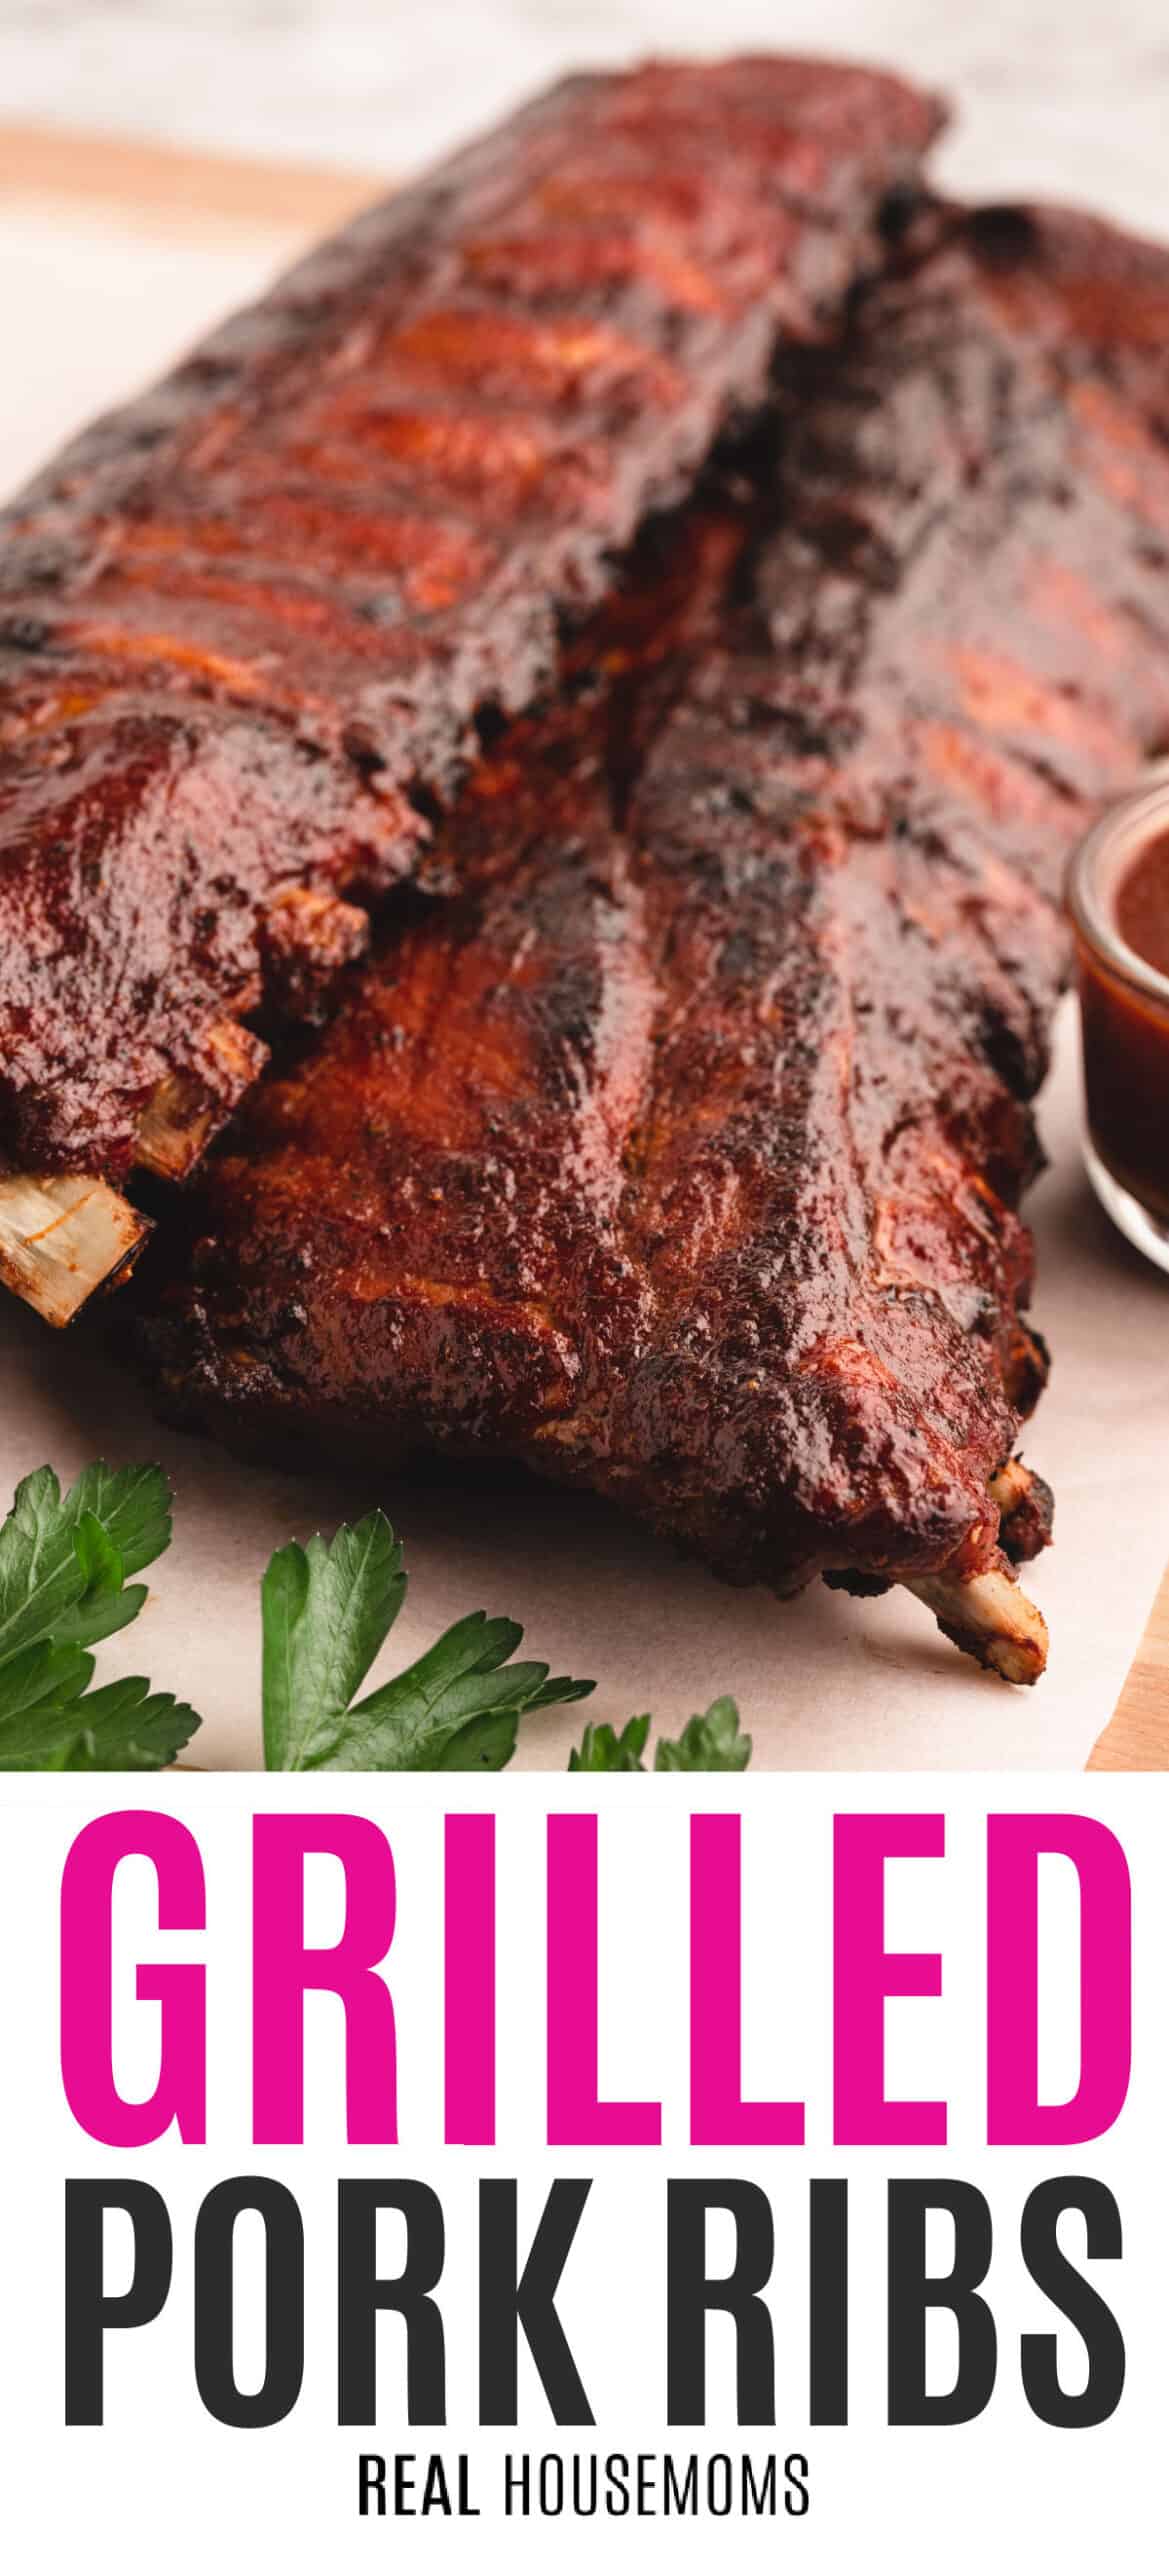 Grilled Ribs - Real Housemoms